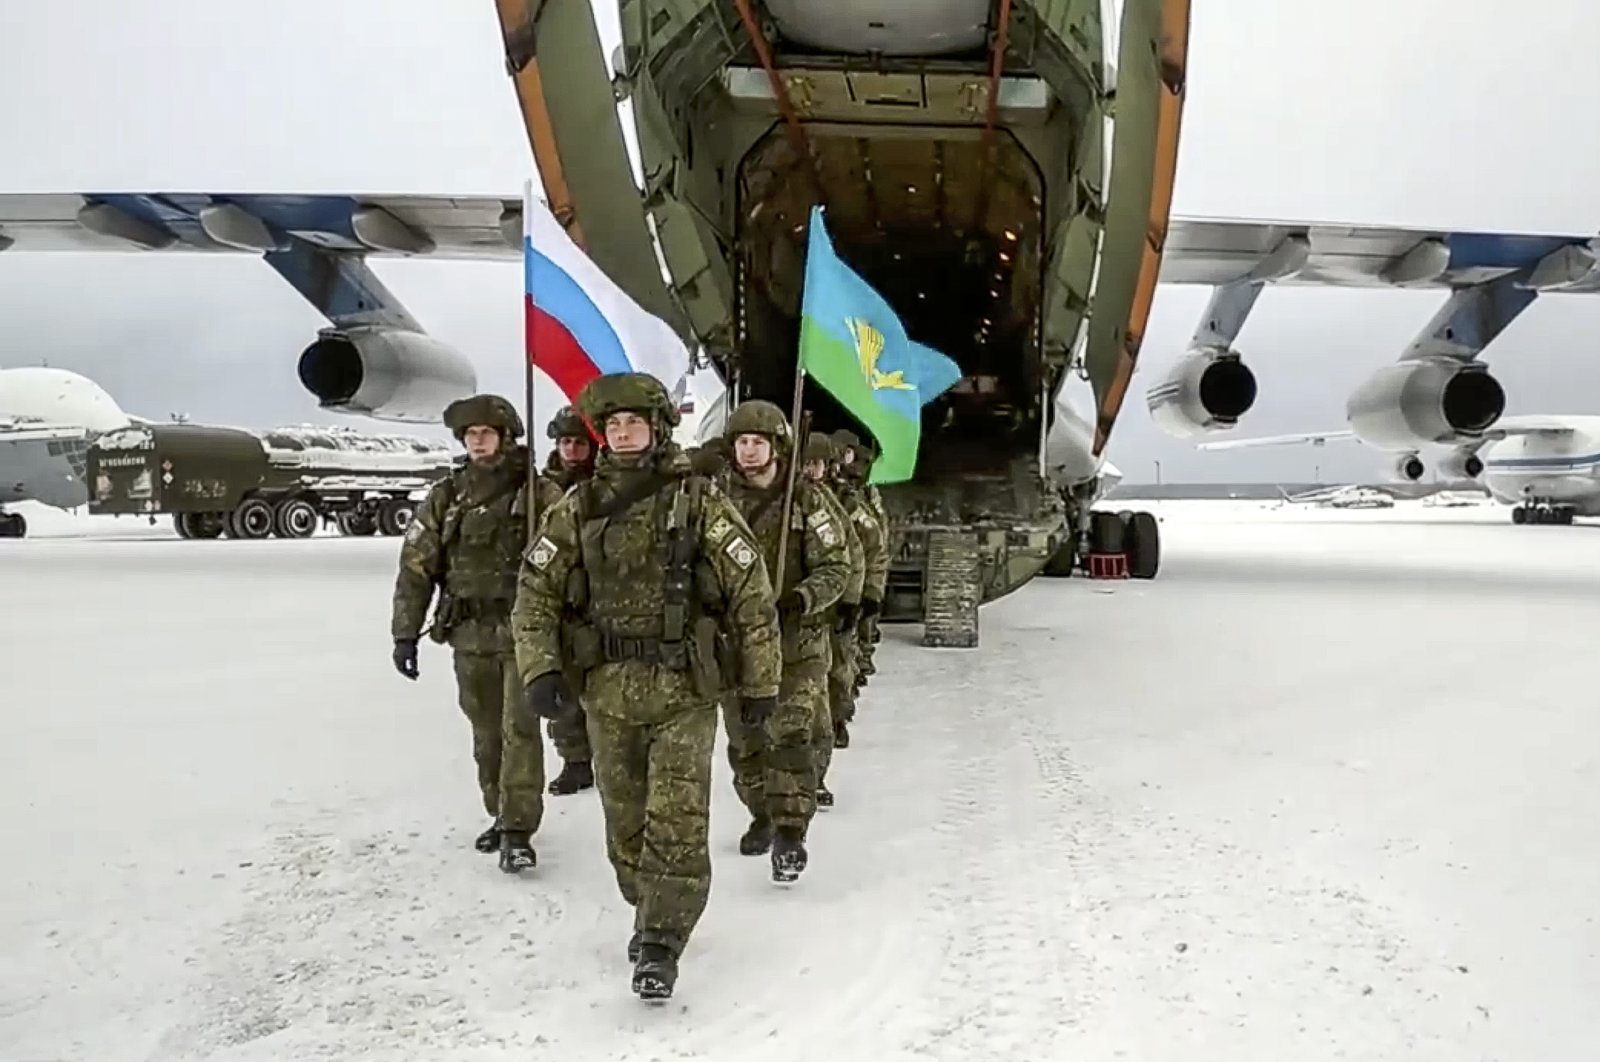 Russian peacekeepers of the Collective Security Treaty Organization (CSTO) leave a Russian military plane after withdrawing its troops at an airport outside Ivanovo, Russia, Jan. 15, 2022. (AP Photo)